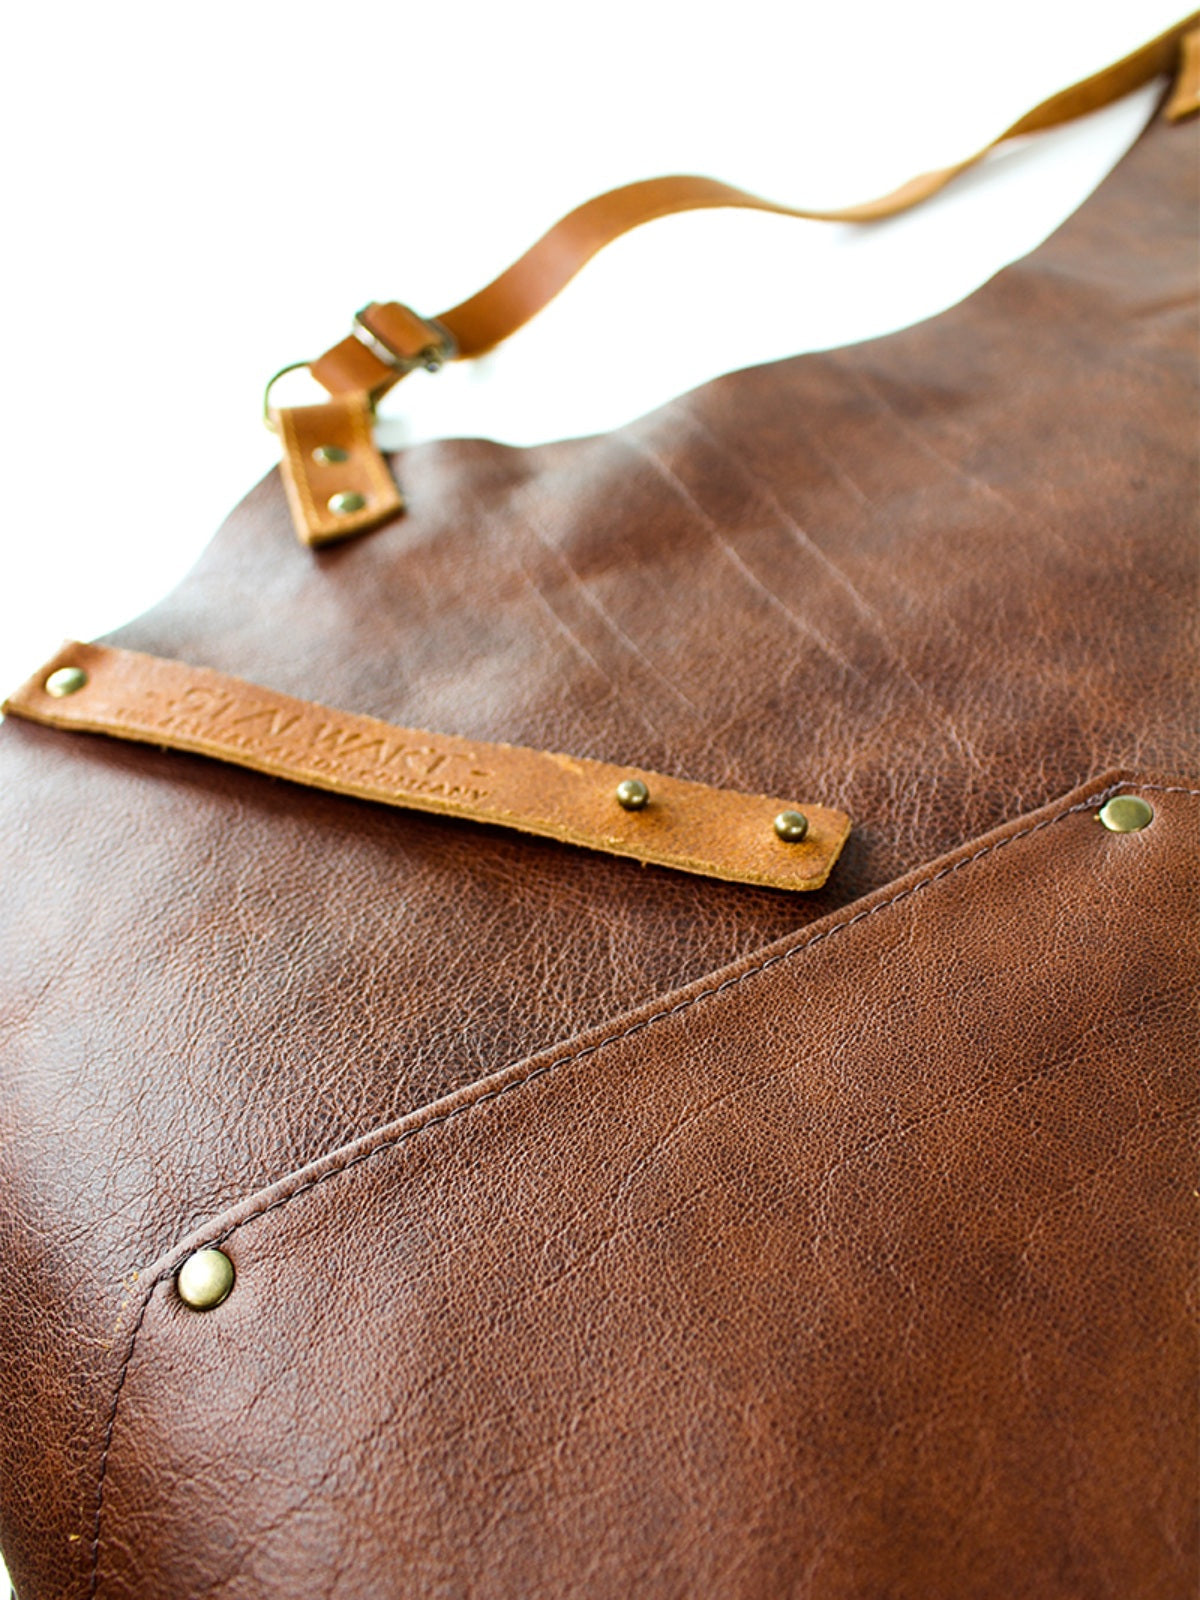 Leather Apron Cross Strap Deluxe Brown by STW -  ChefsCotton